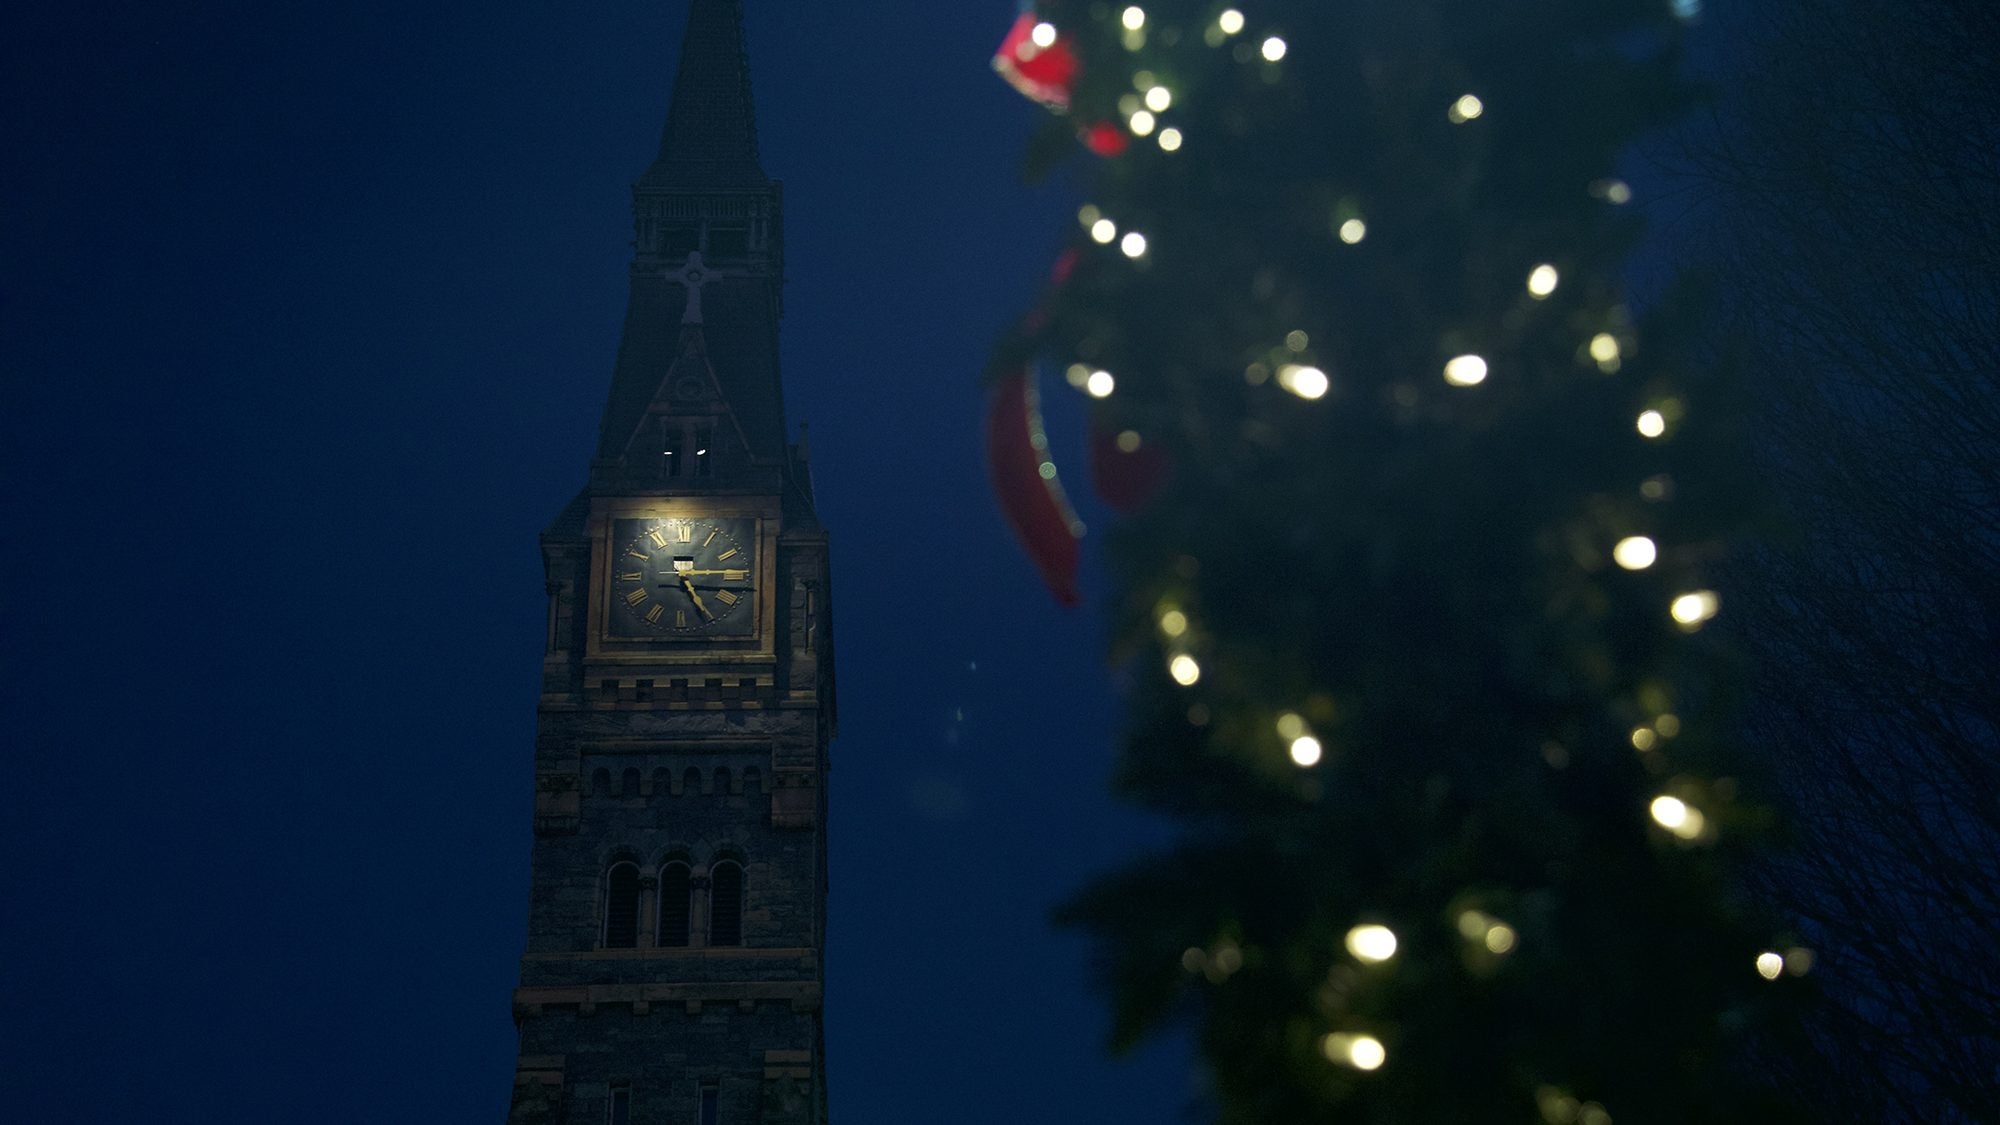 Festive holiday lights on greenery light up the night sky against a backdrop of the iconic Healy Building clocktower.